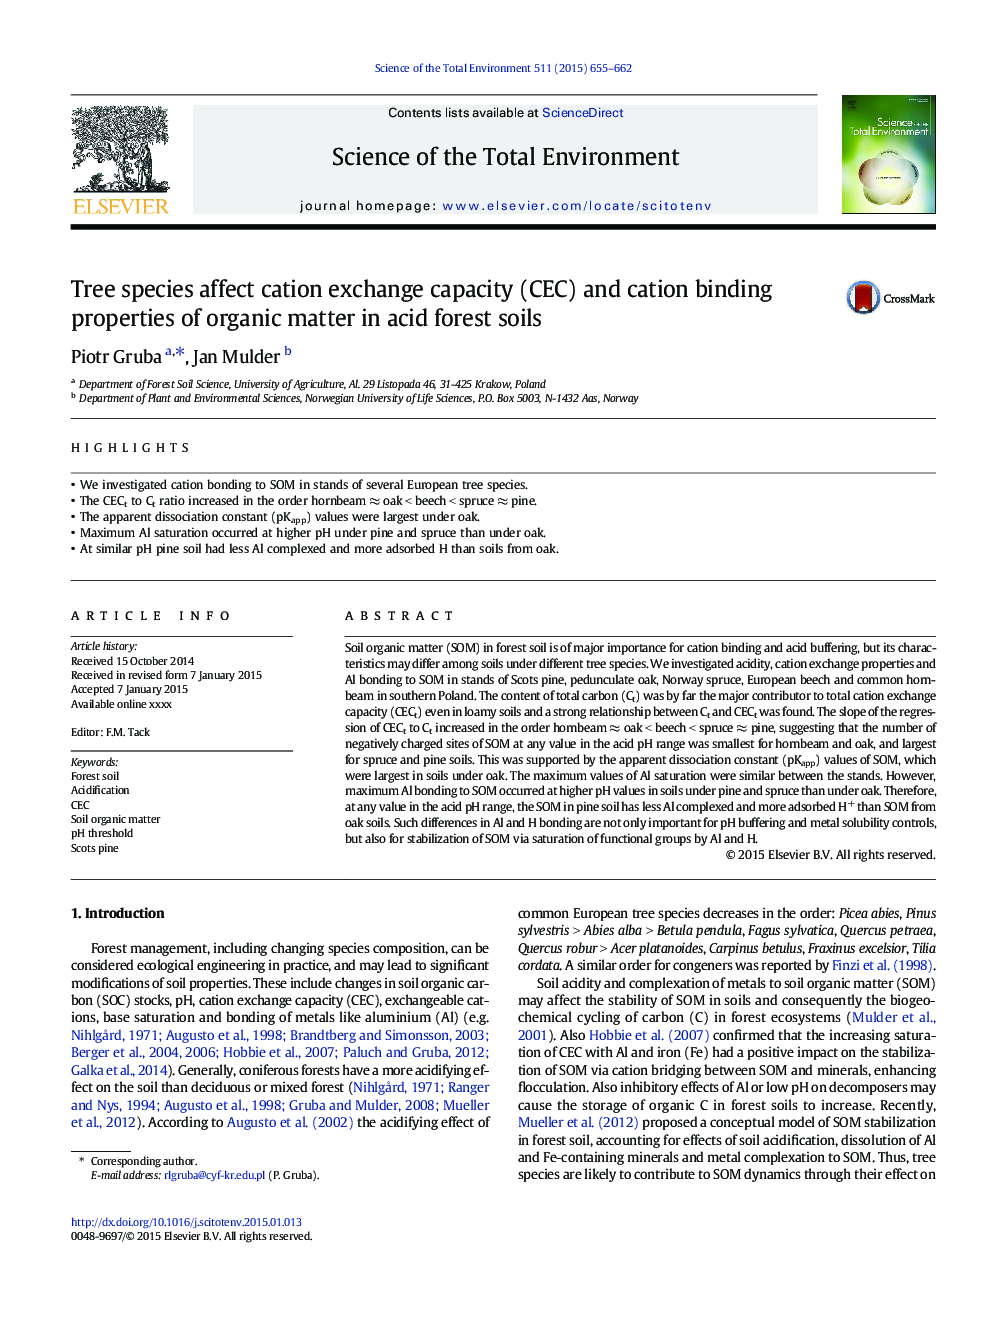 Tree species affect cation exchange capacity (CEC) and cation binding properties of organic matter in acid forest soils